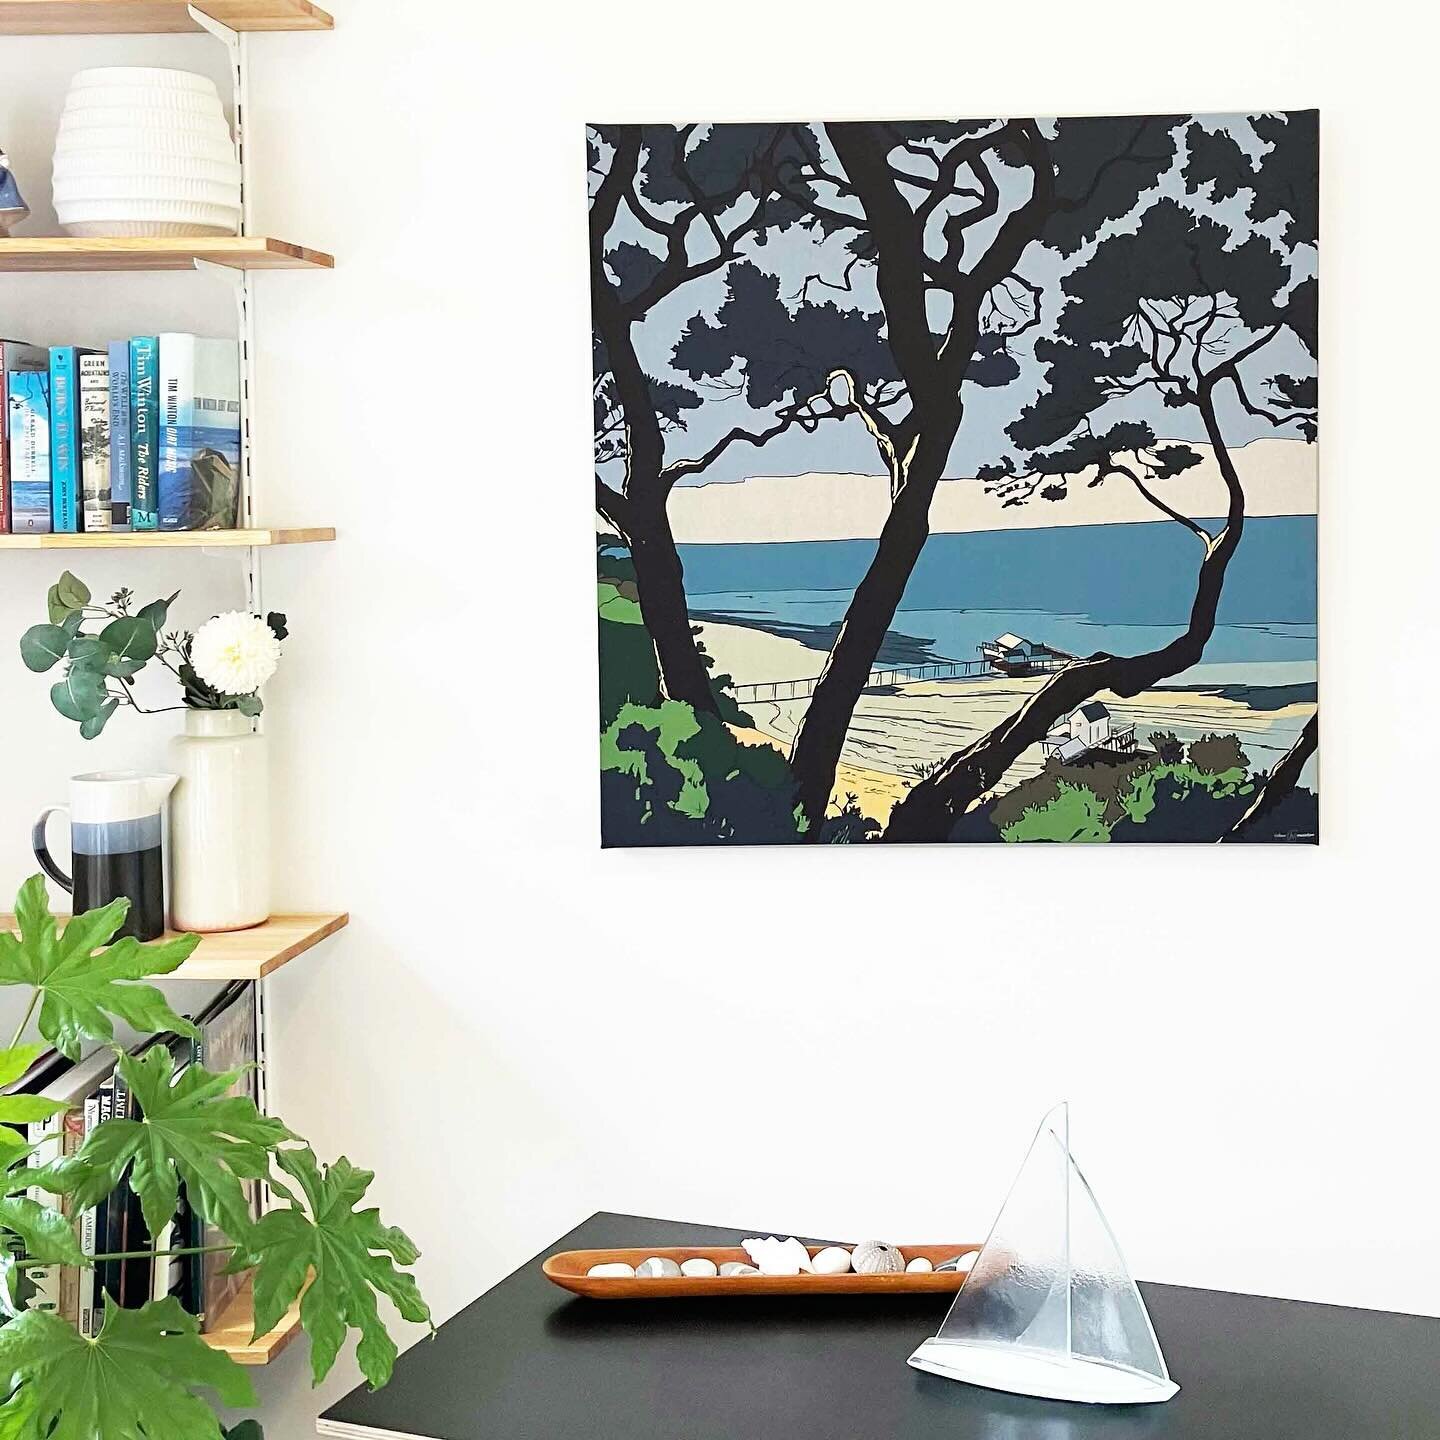 Available today @artisans_alley_mornington - Large 90cm x 90cm textured linen &amp; cotton canvas of my Sorrento Millionaires Walk artwork capturing the stunning view through the Moonah Trees 👌#colourmeadow #artisansalleymornington #sorrentovictoria